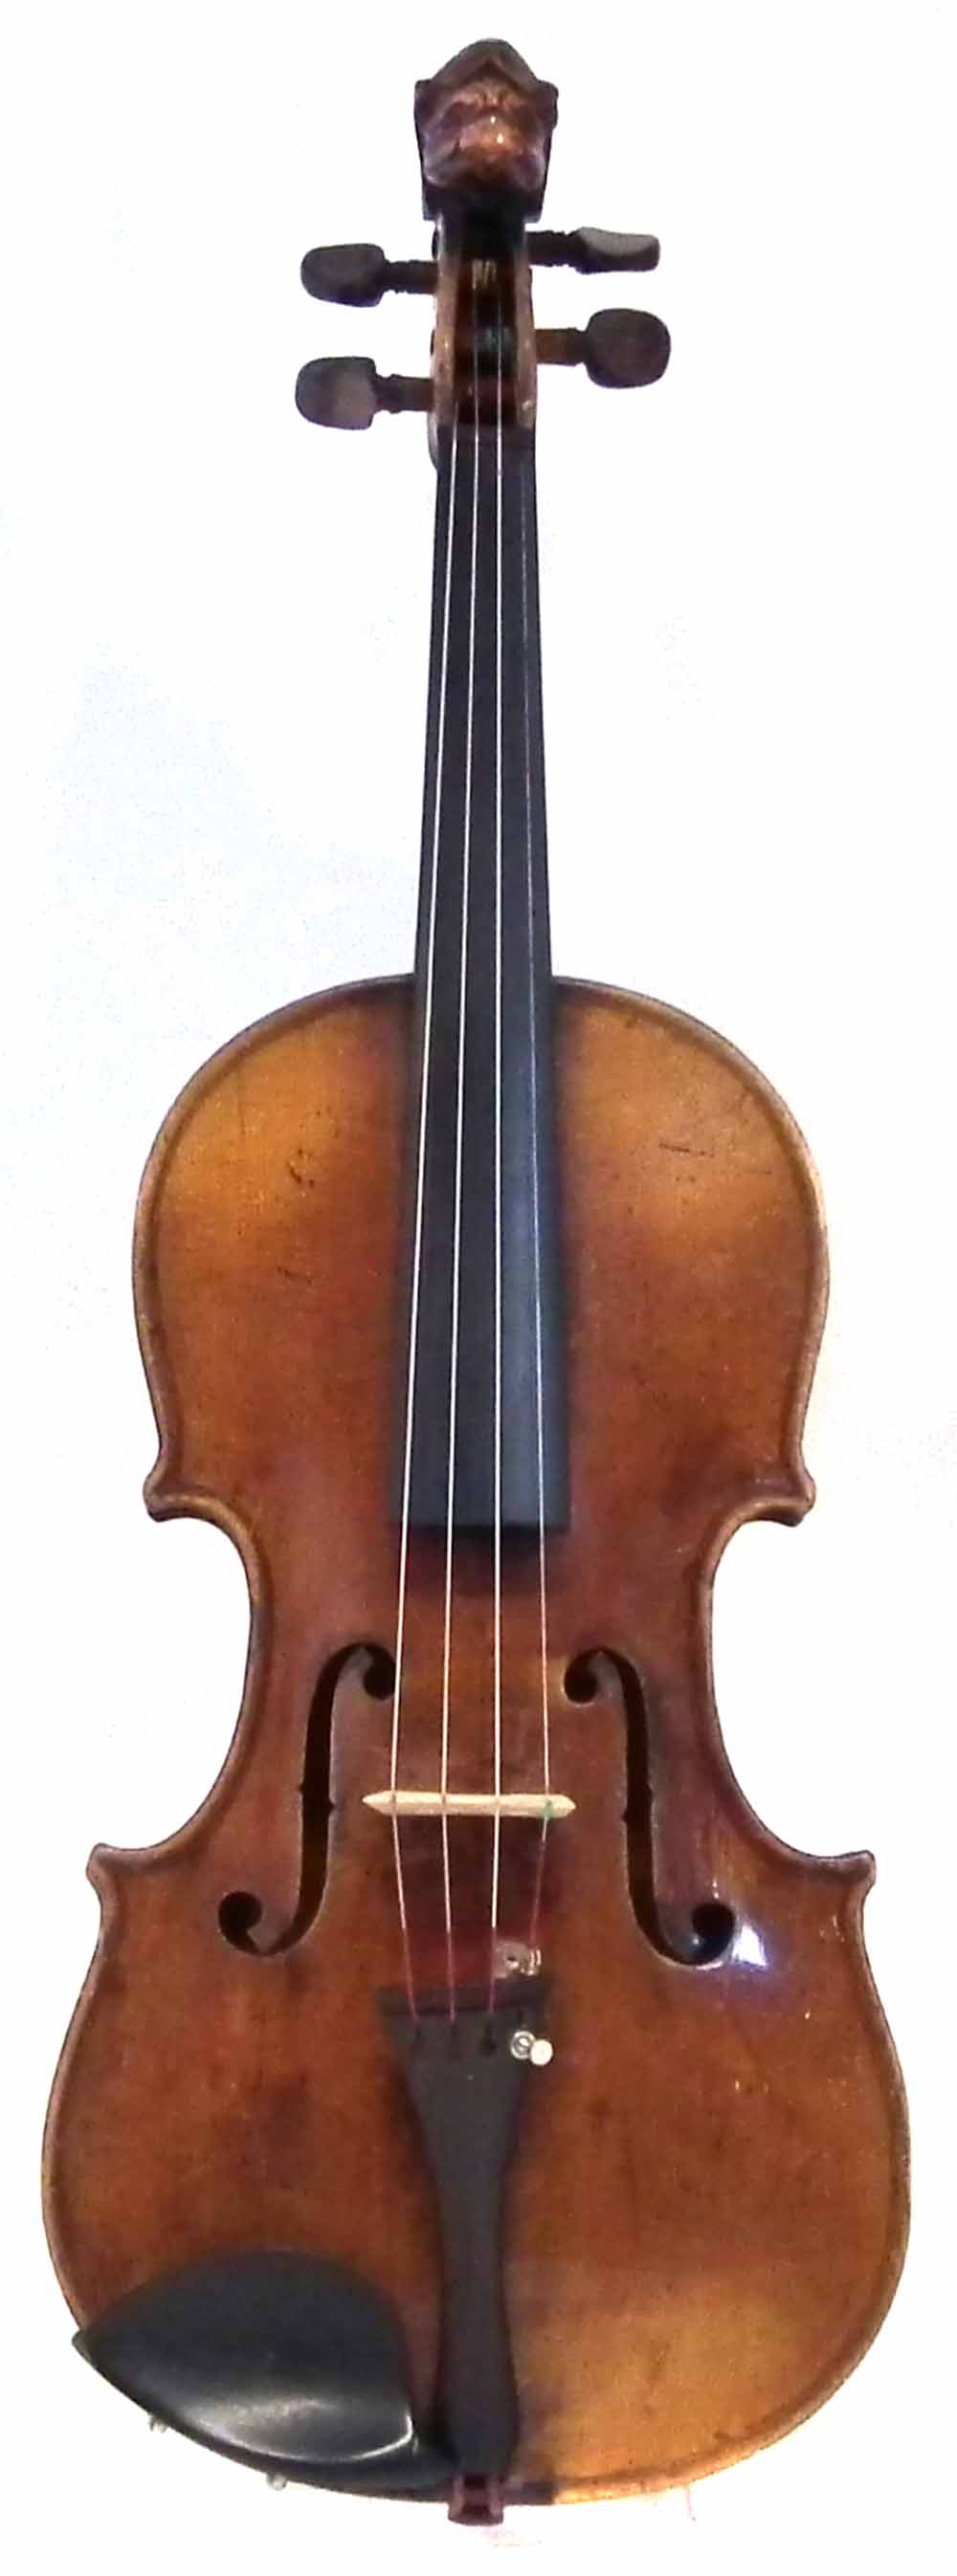 German violin with lion head scroll, two piece back and Birdseye maple neck, together with case